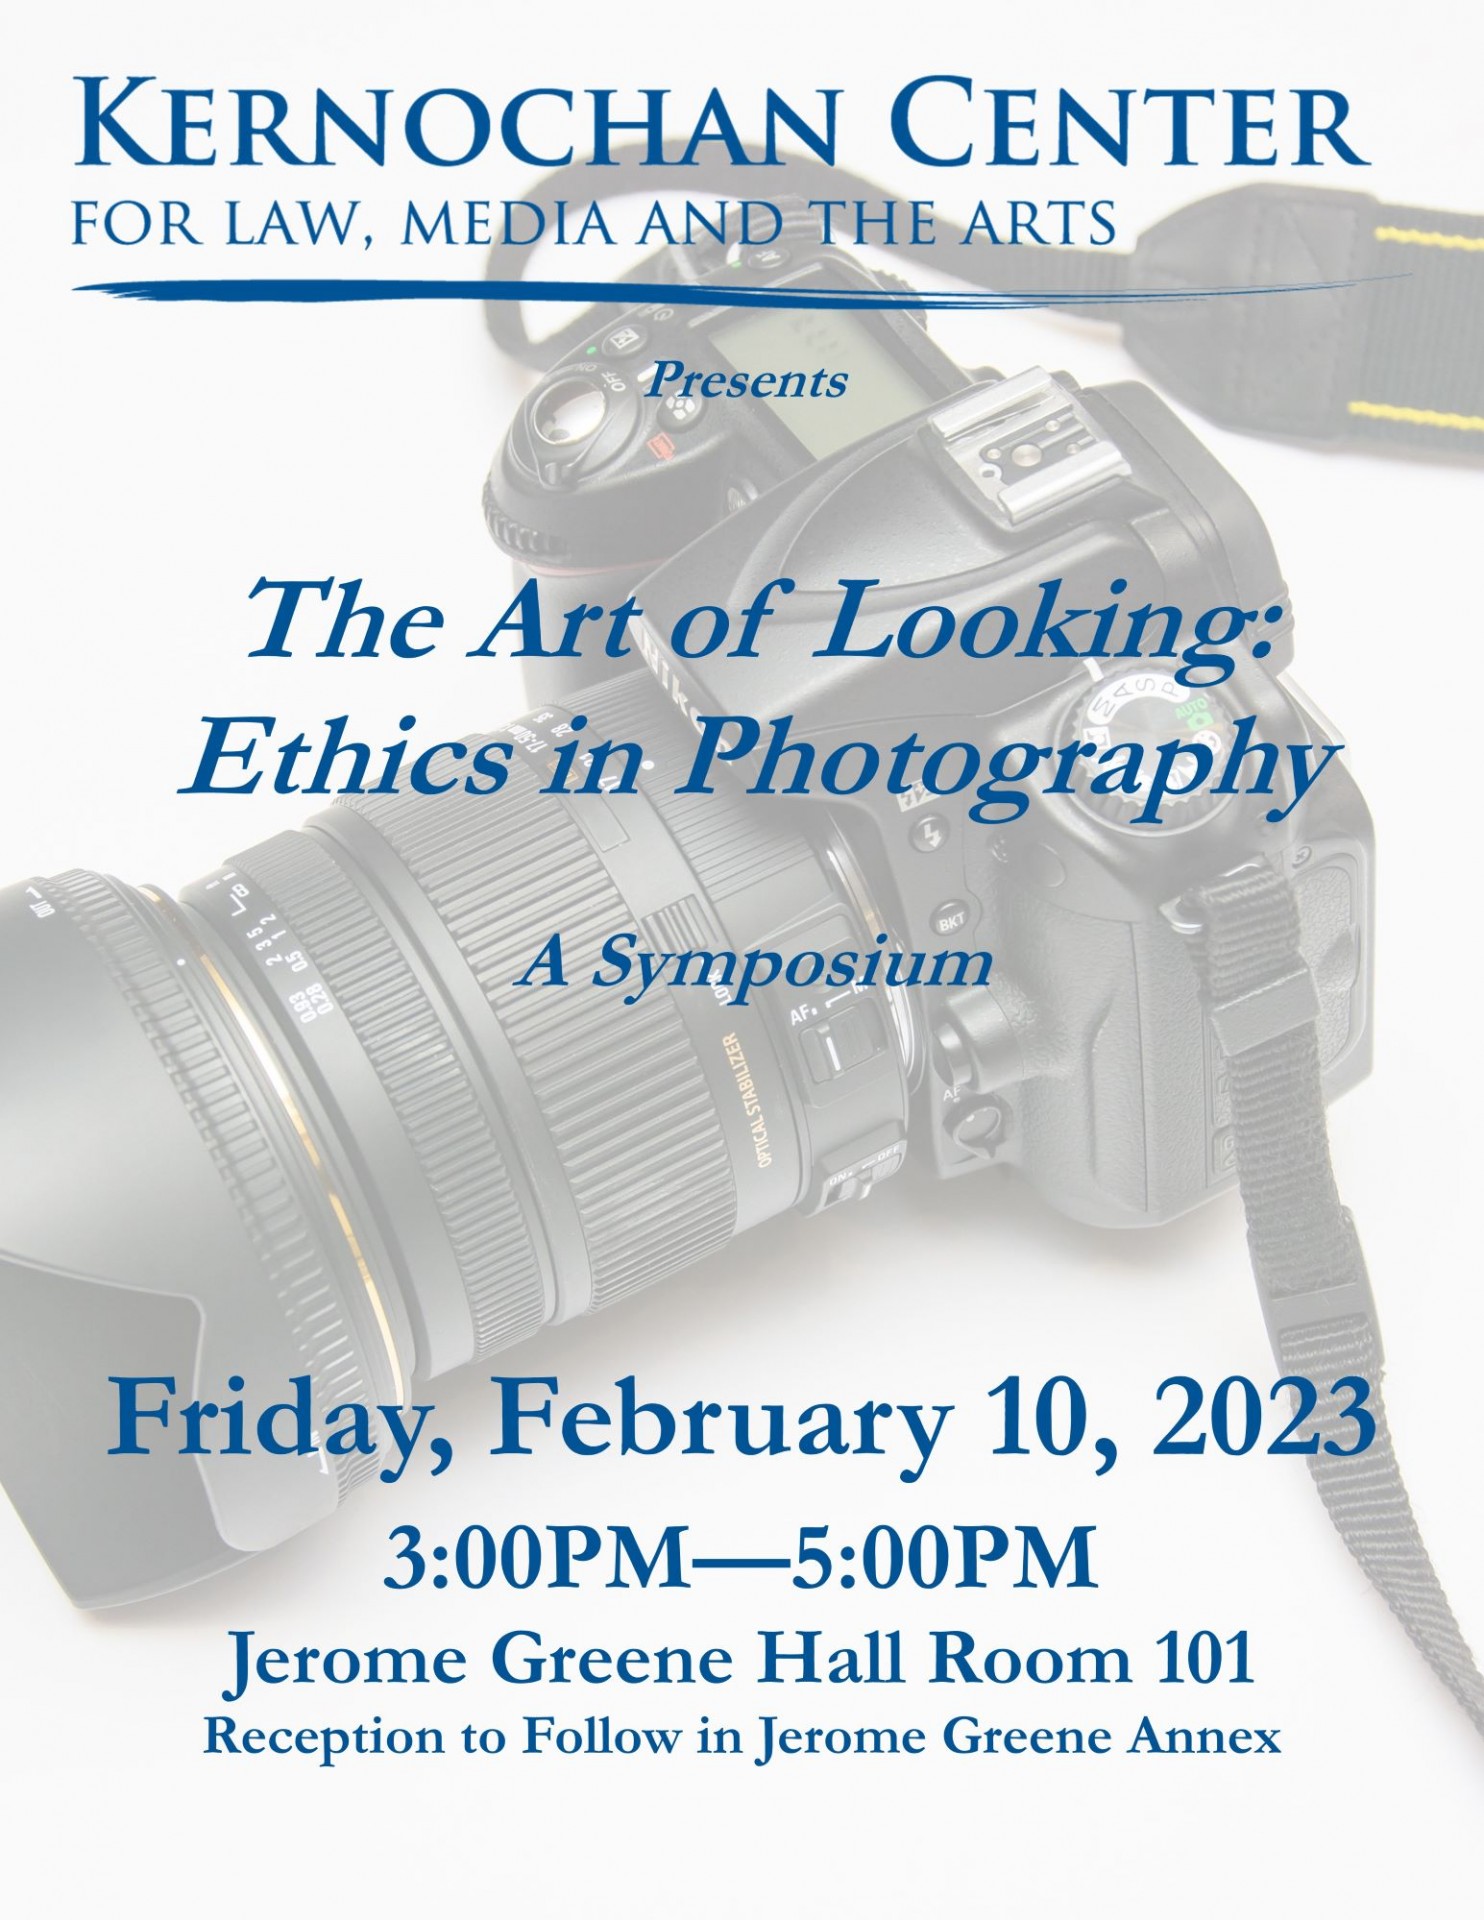 Art Law Symposium 2023: The Art of Looking: Ethics in Photography